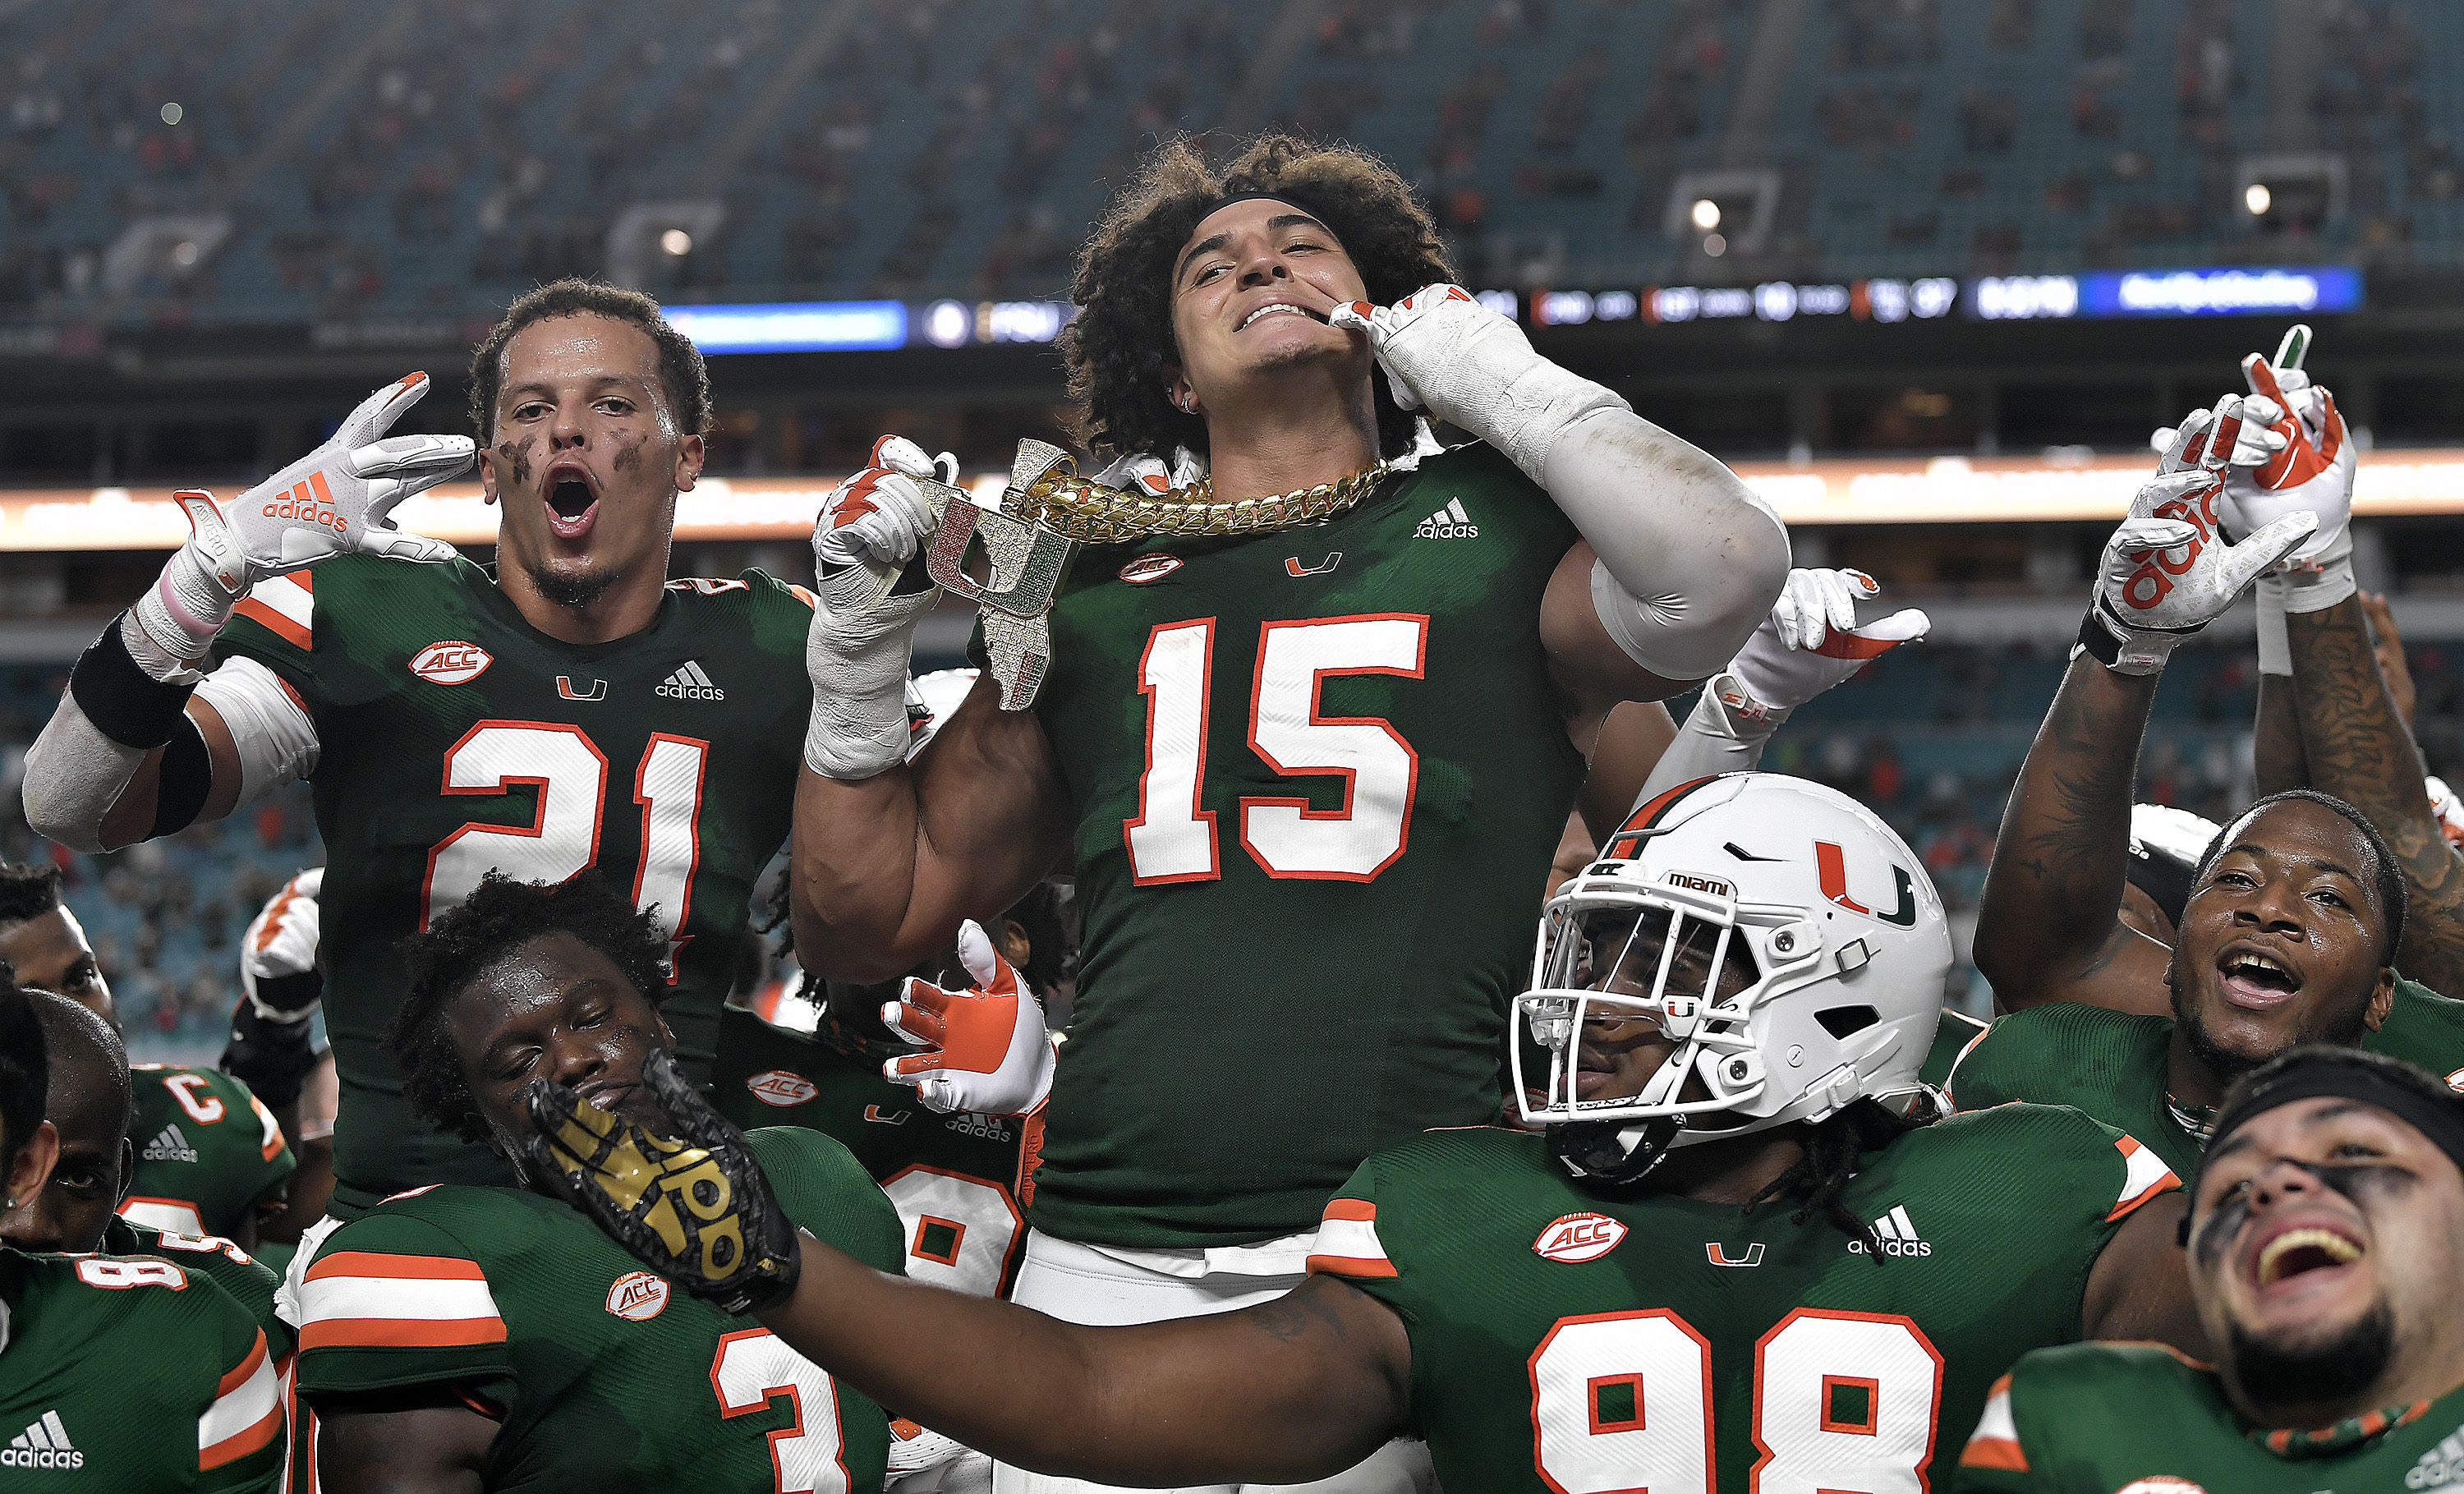 Miami lineman and NFL draft prospect Jaelan Phillips displays the tunover chain after intercepting a Florida State pass during the first half of their game on Saturday, September 26, 2020.